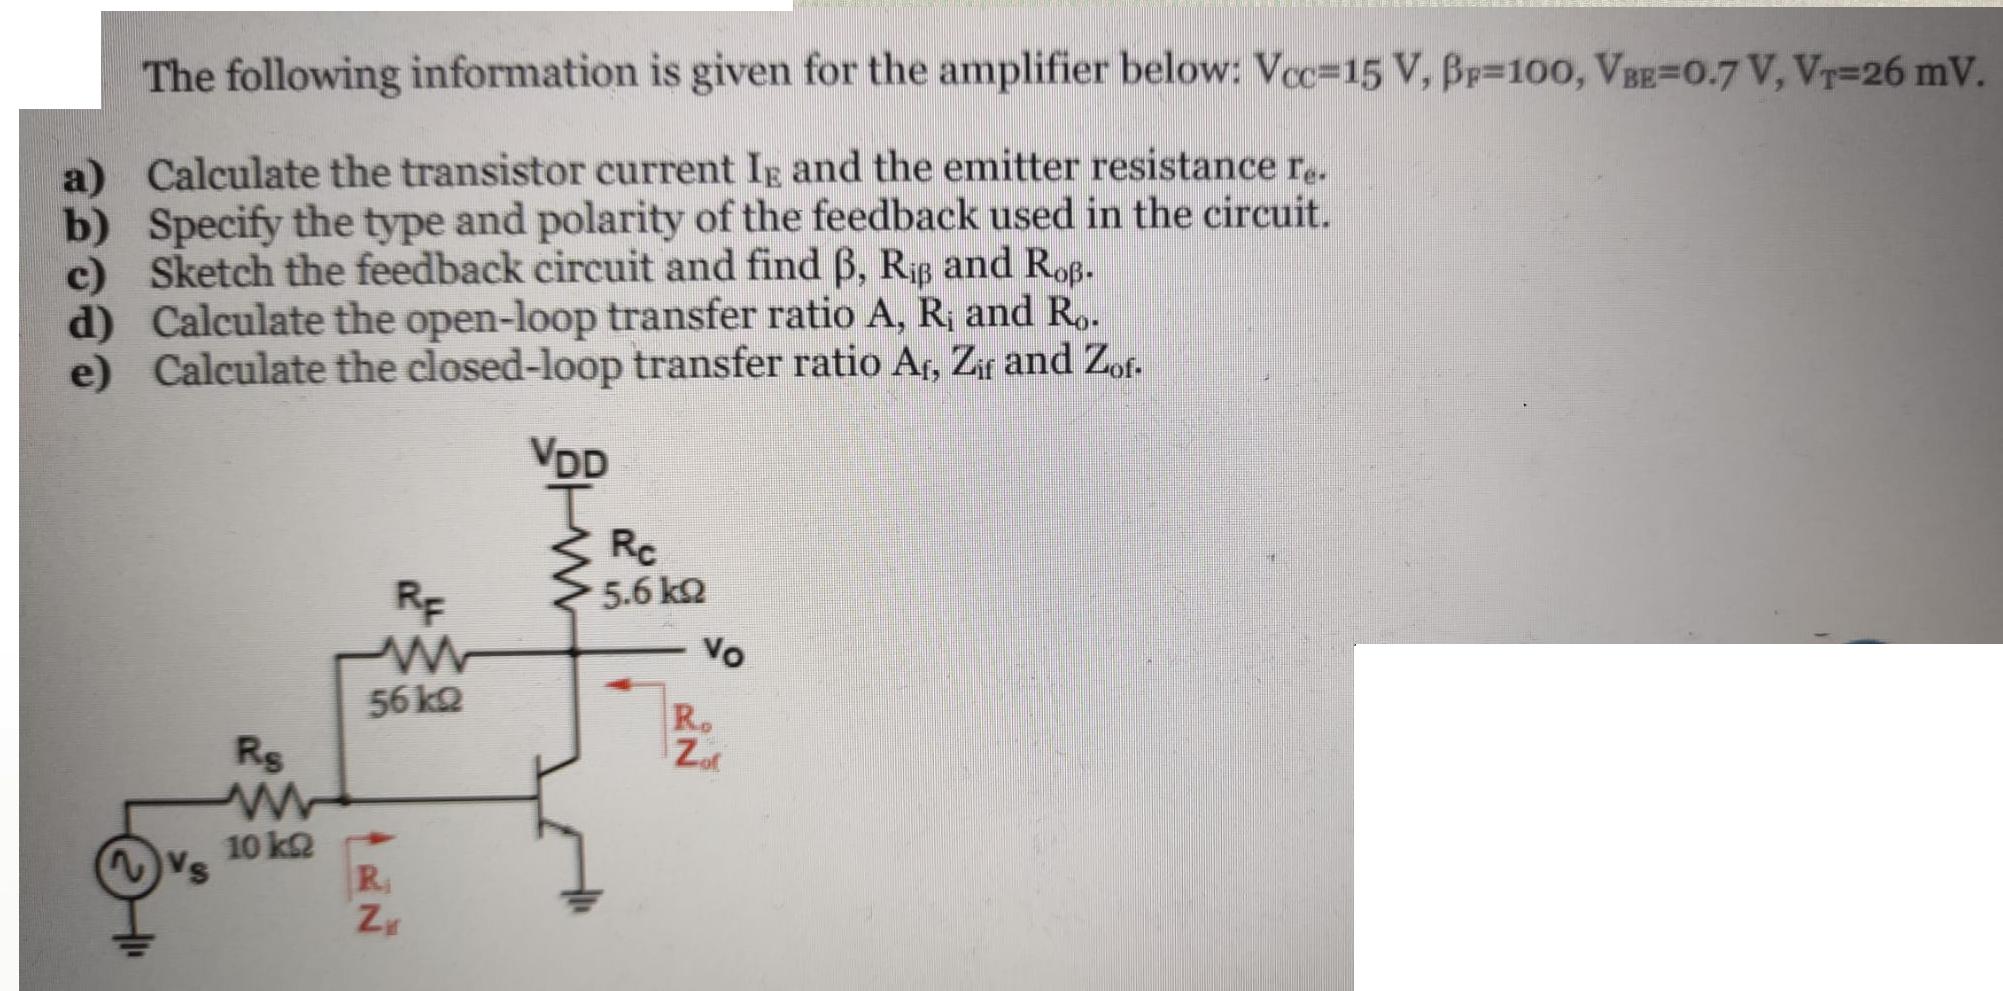 c) e) The following information is given for the amplifier below: Vcc=15 V, Bp-100, VBE=0.7 V, VT=26 mV.